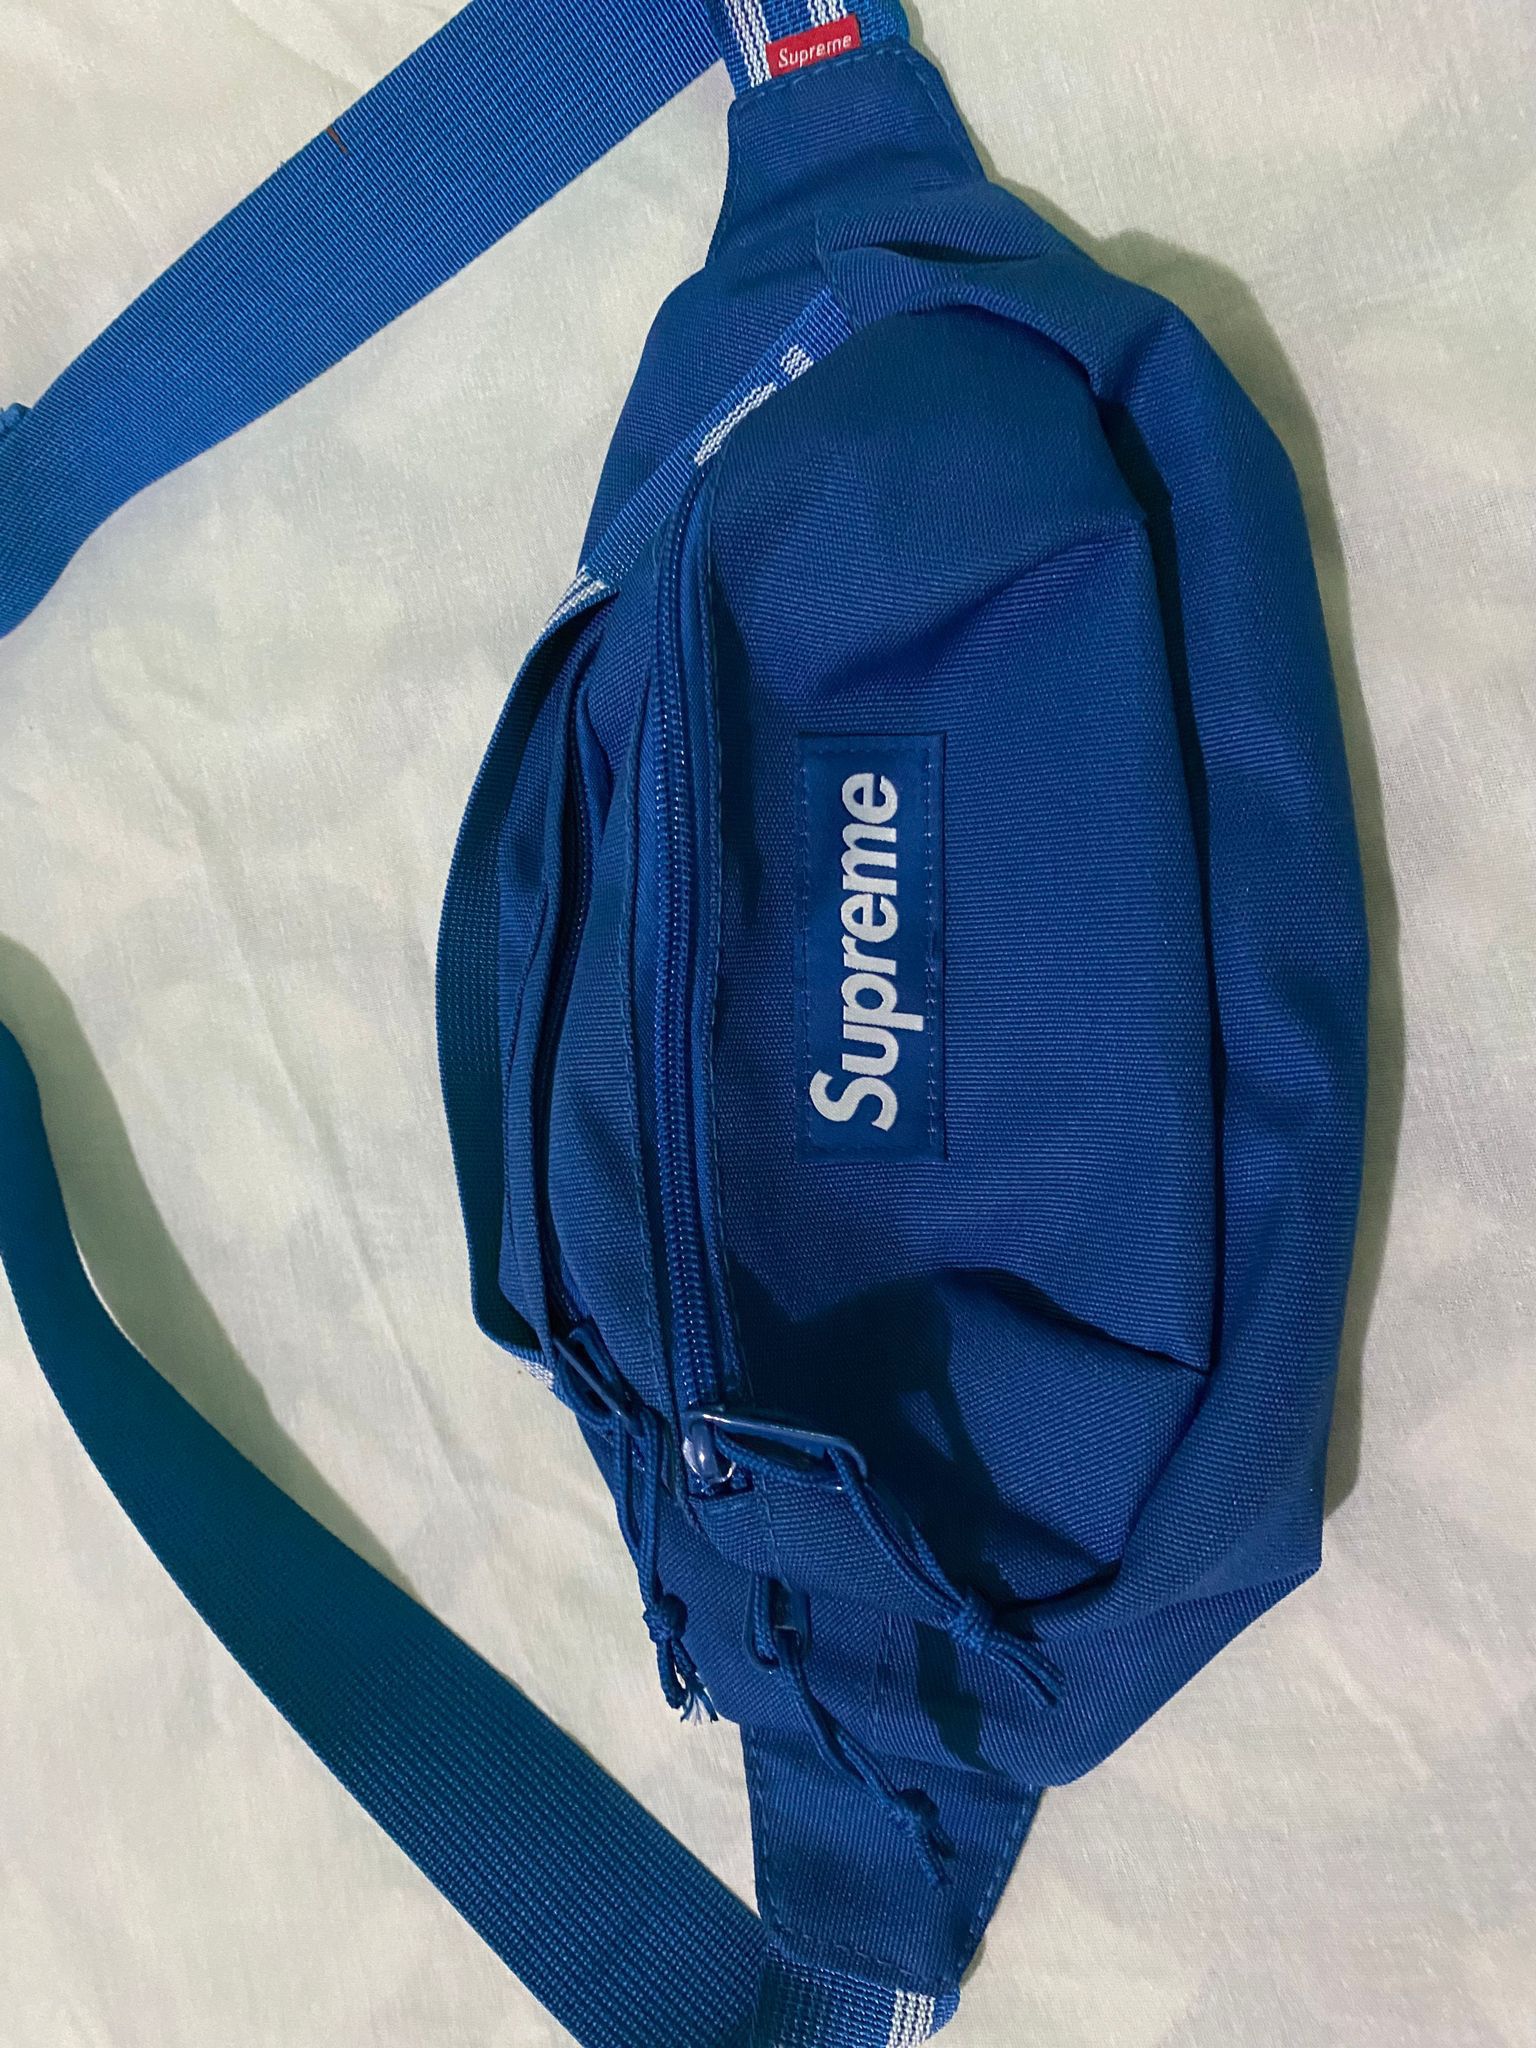 SUPREME WAIST BAG (SS18) ROYAL BLUE for Sale in Brooklyn